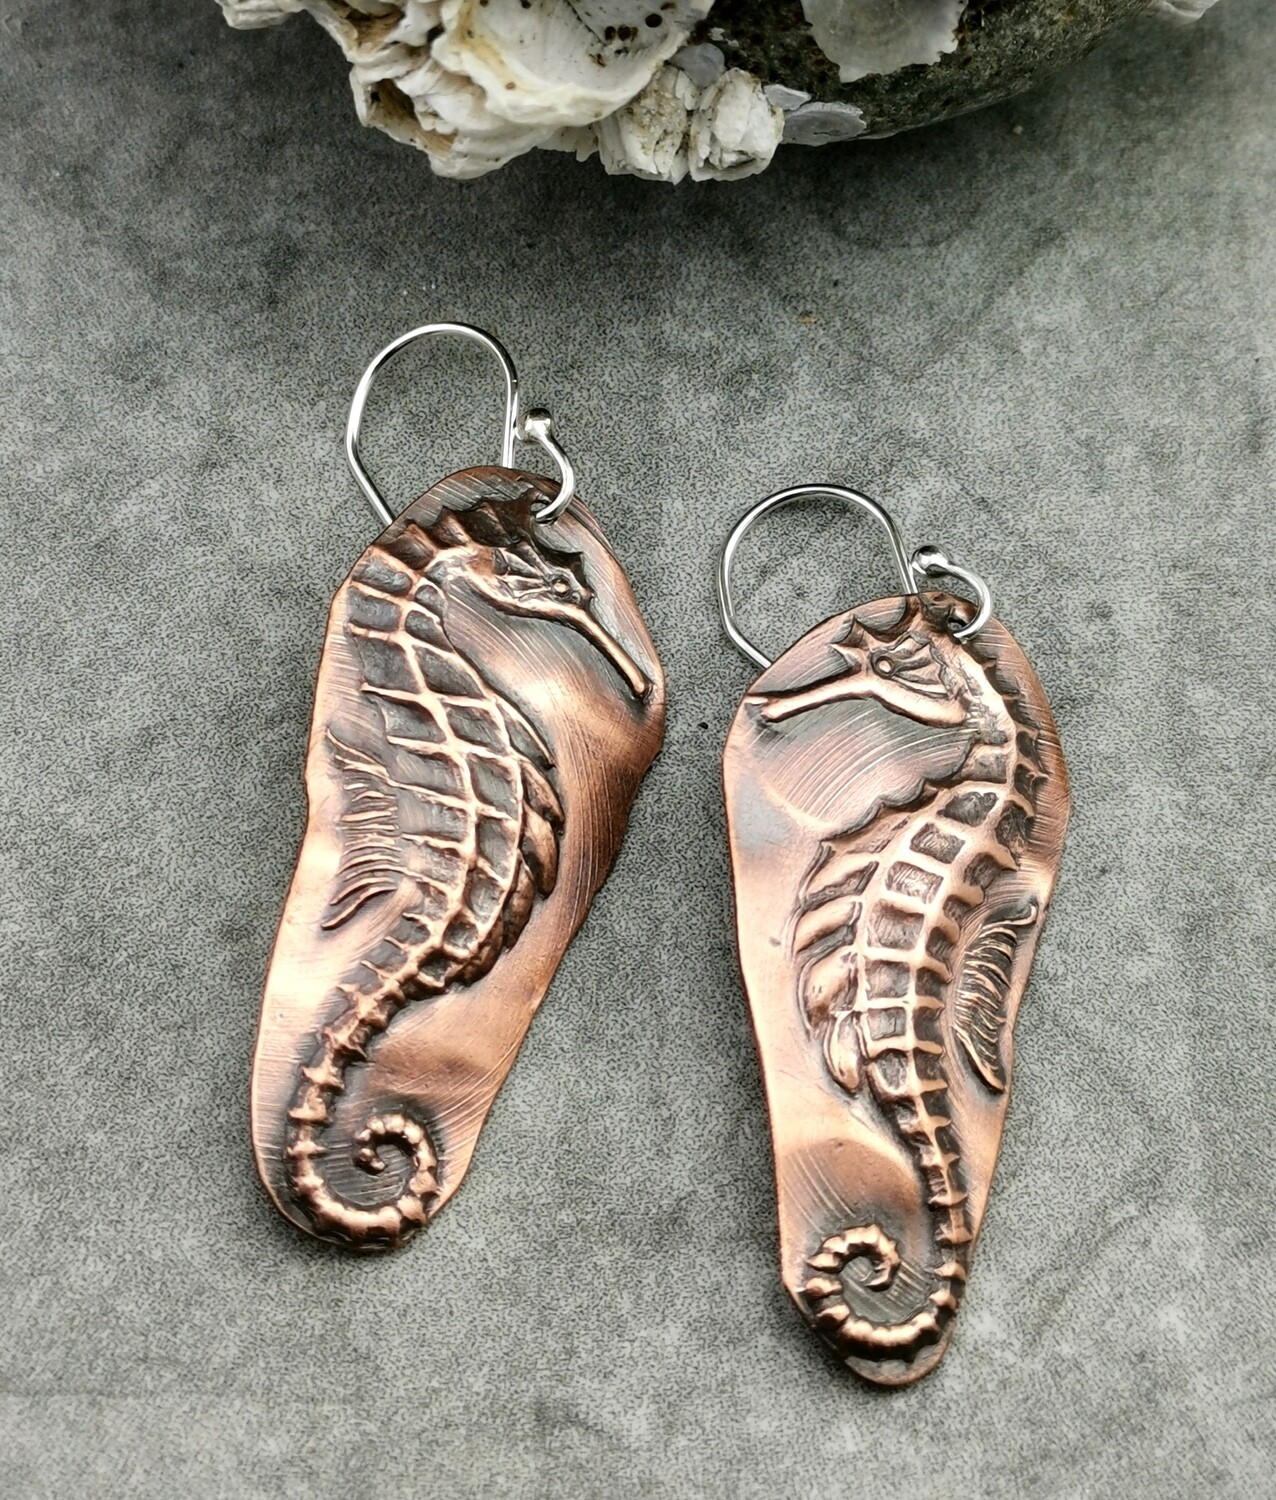 Seahorse Earrings, Seahorse Jewelry, Beach Jewelry, Gifts for Her, Copper Jewelry, Seahorse, Ocean, Water Element, Strength